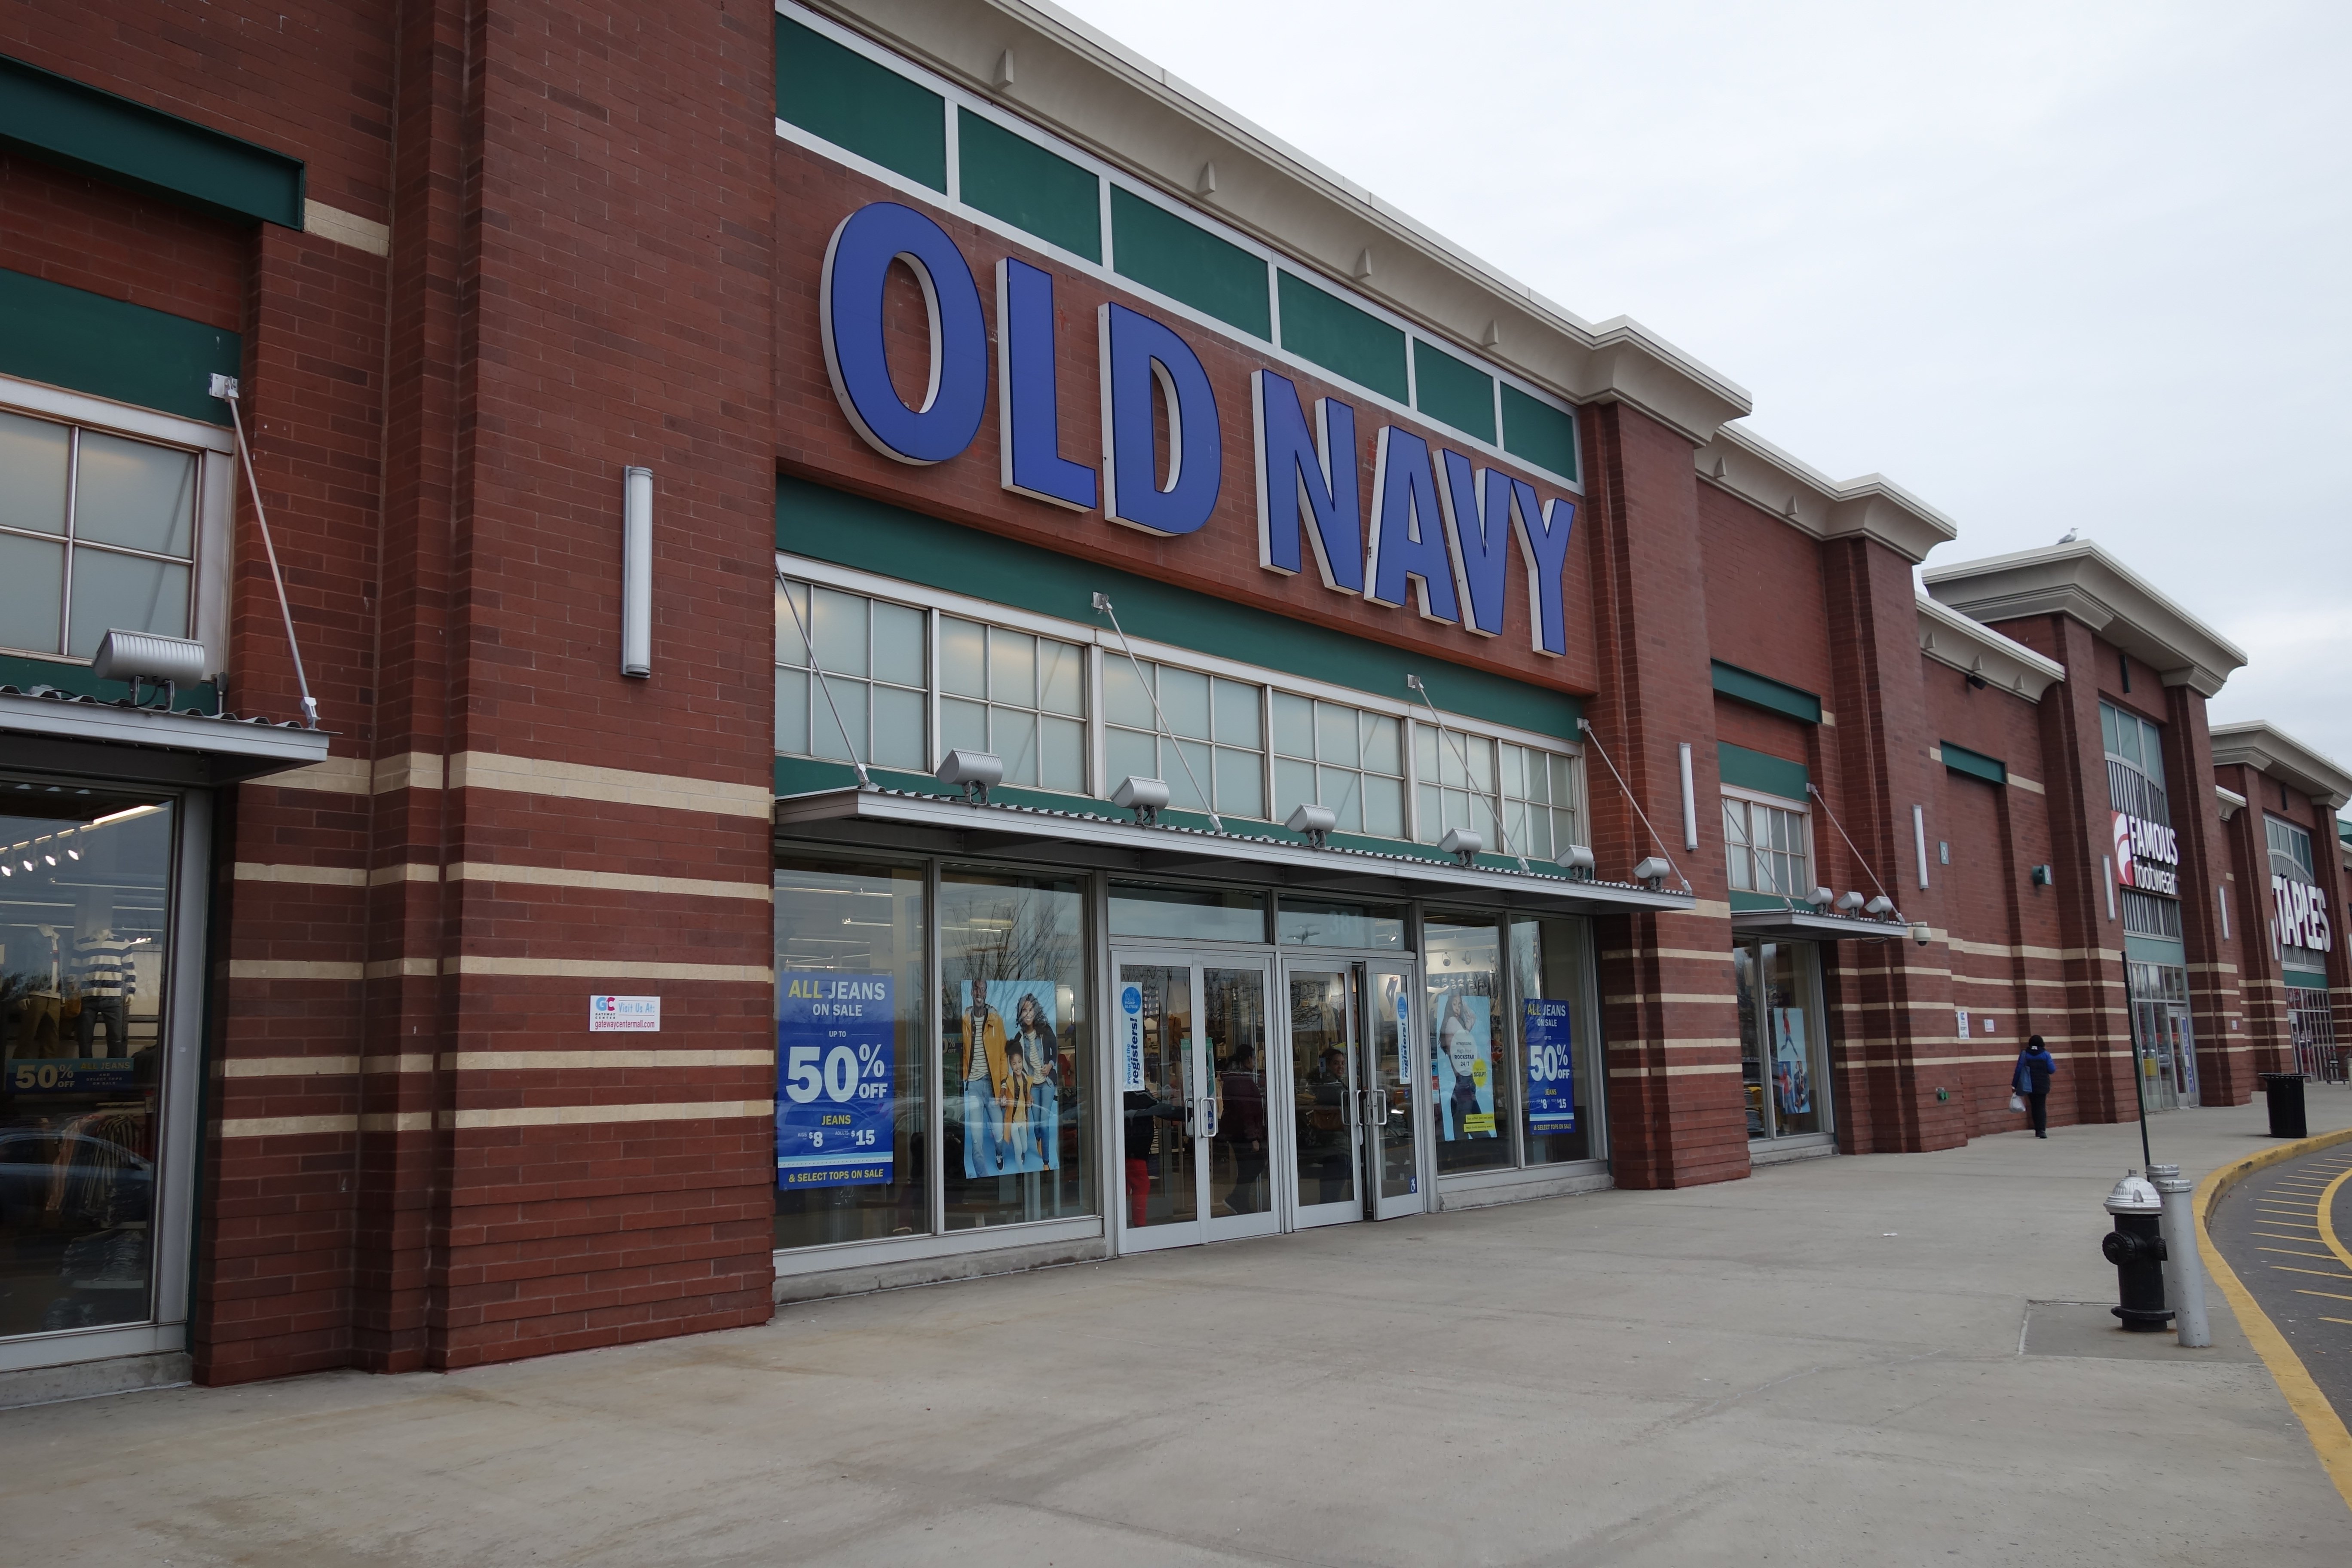 The Old Navy store of the Gateway Center South mall, on Gateway Plaza west of Erskine Street in Spring Creek, Brooklyn. | Source: Wikimedia Commons